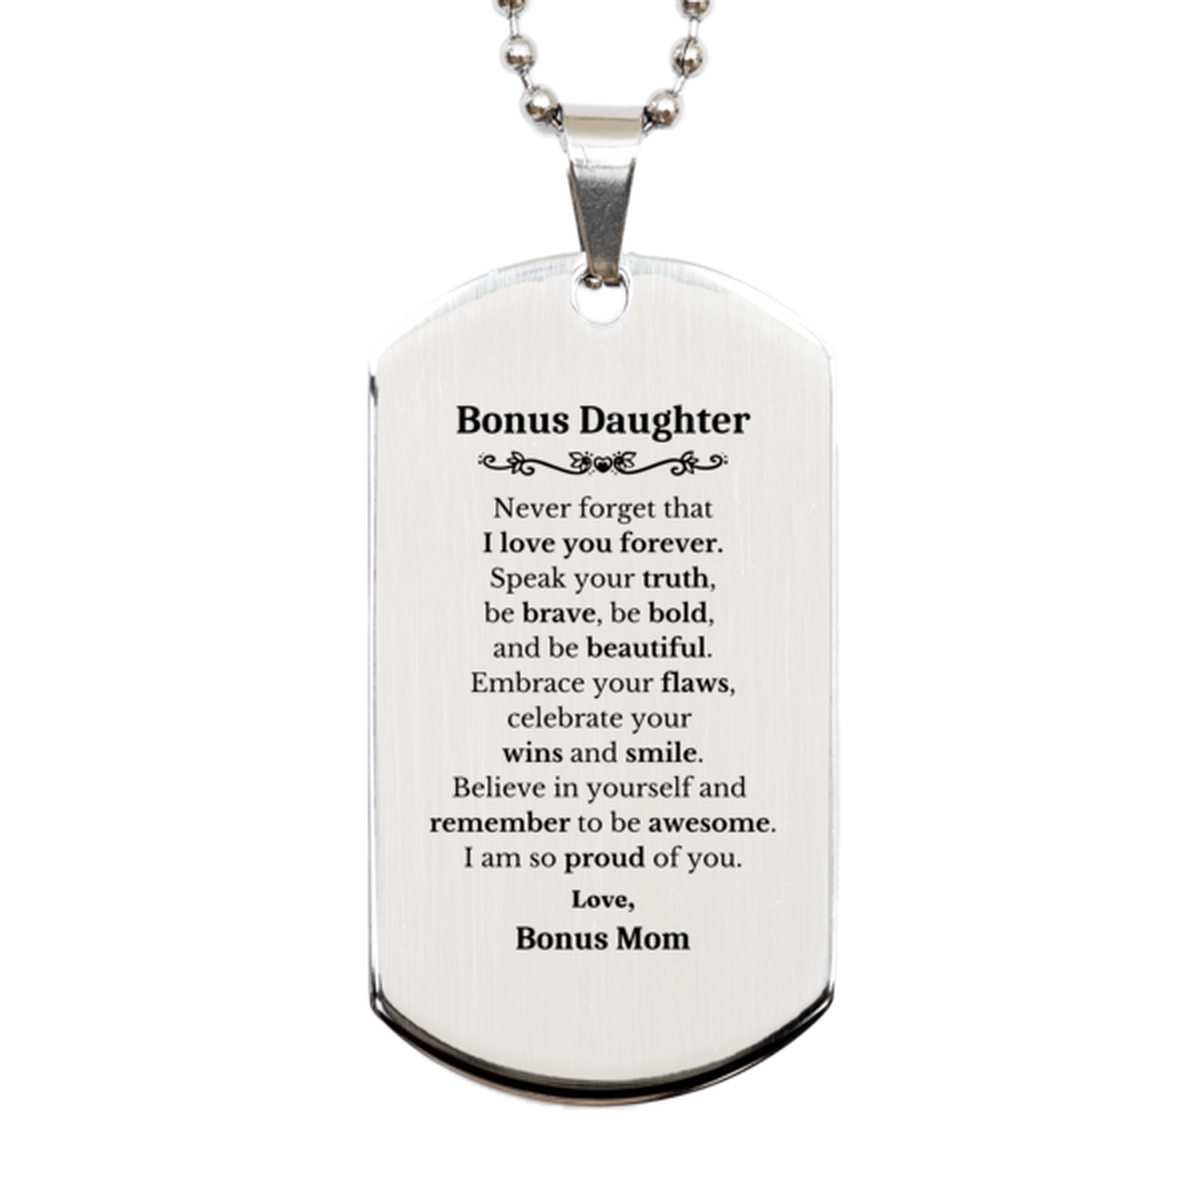 Bonus Daughter Silver Dog Tag, Never forget that I love you forever, Inspirational Bonus Daughter Birthday Unique Gifts From Bonus Mom